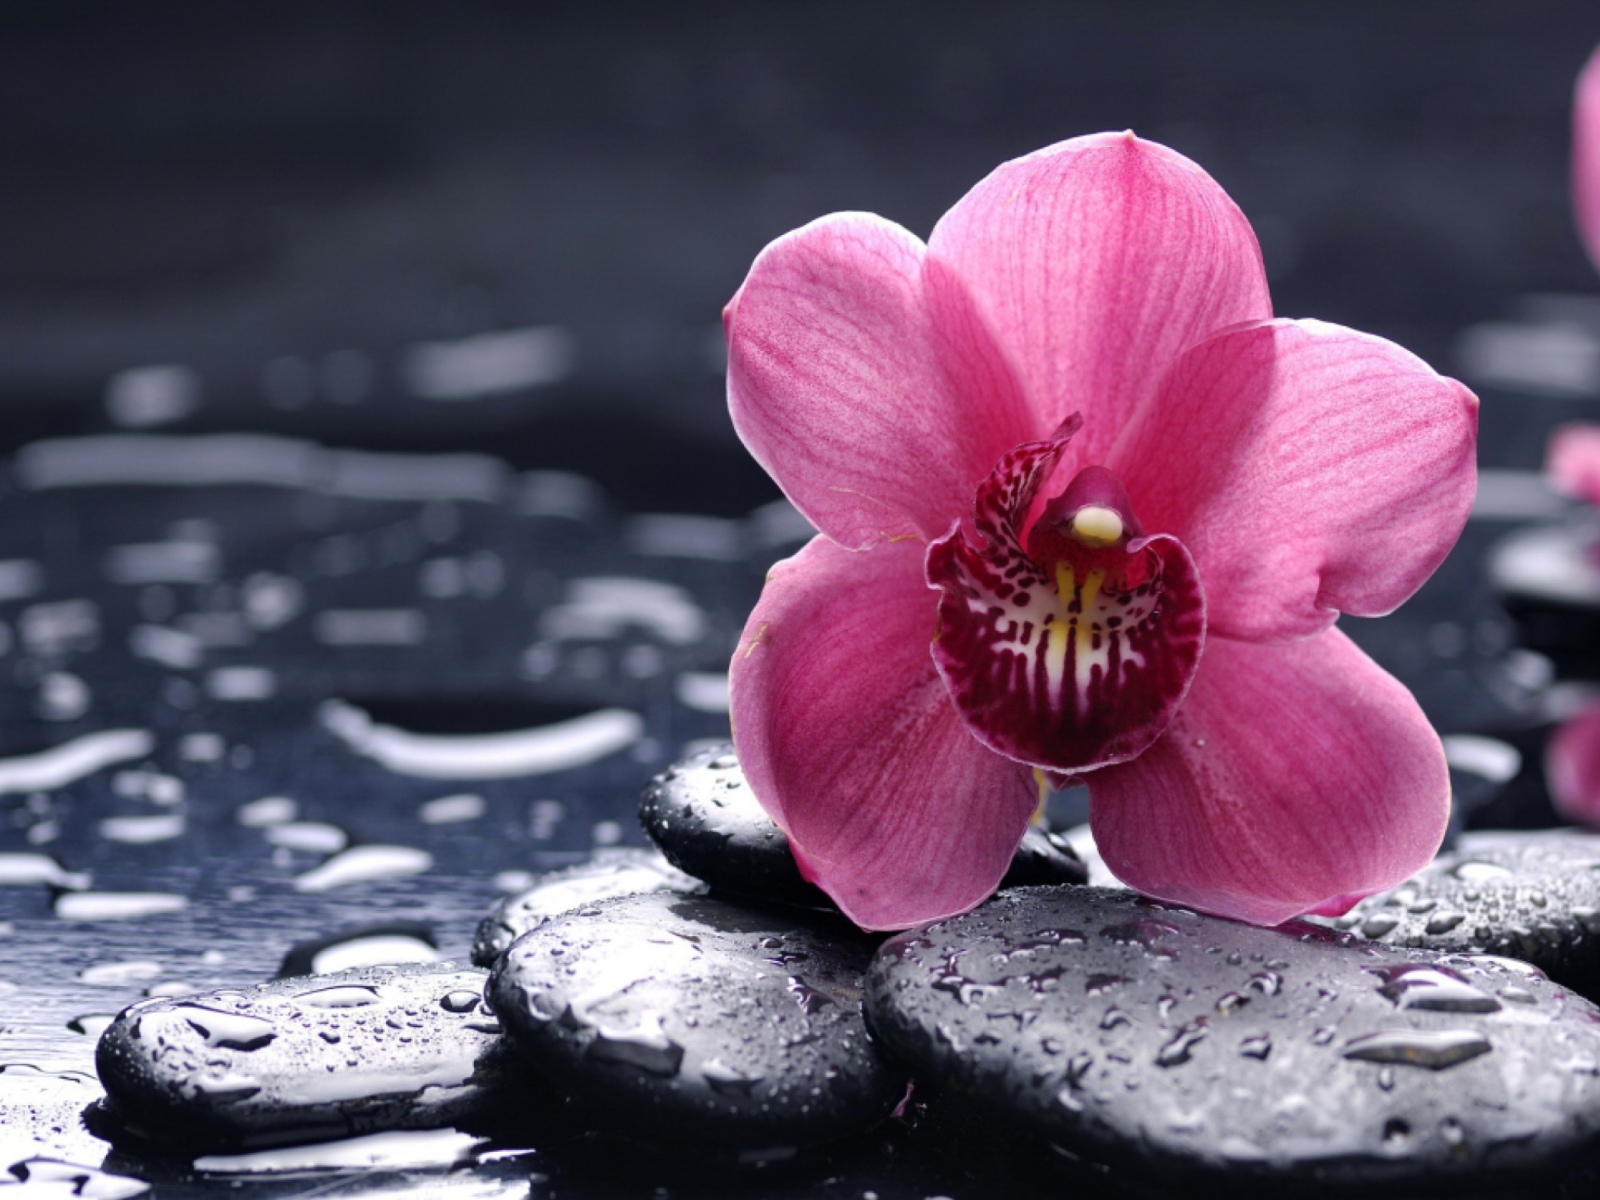 Pink Flower And Stones wallpaper 1600x1200